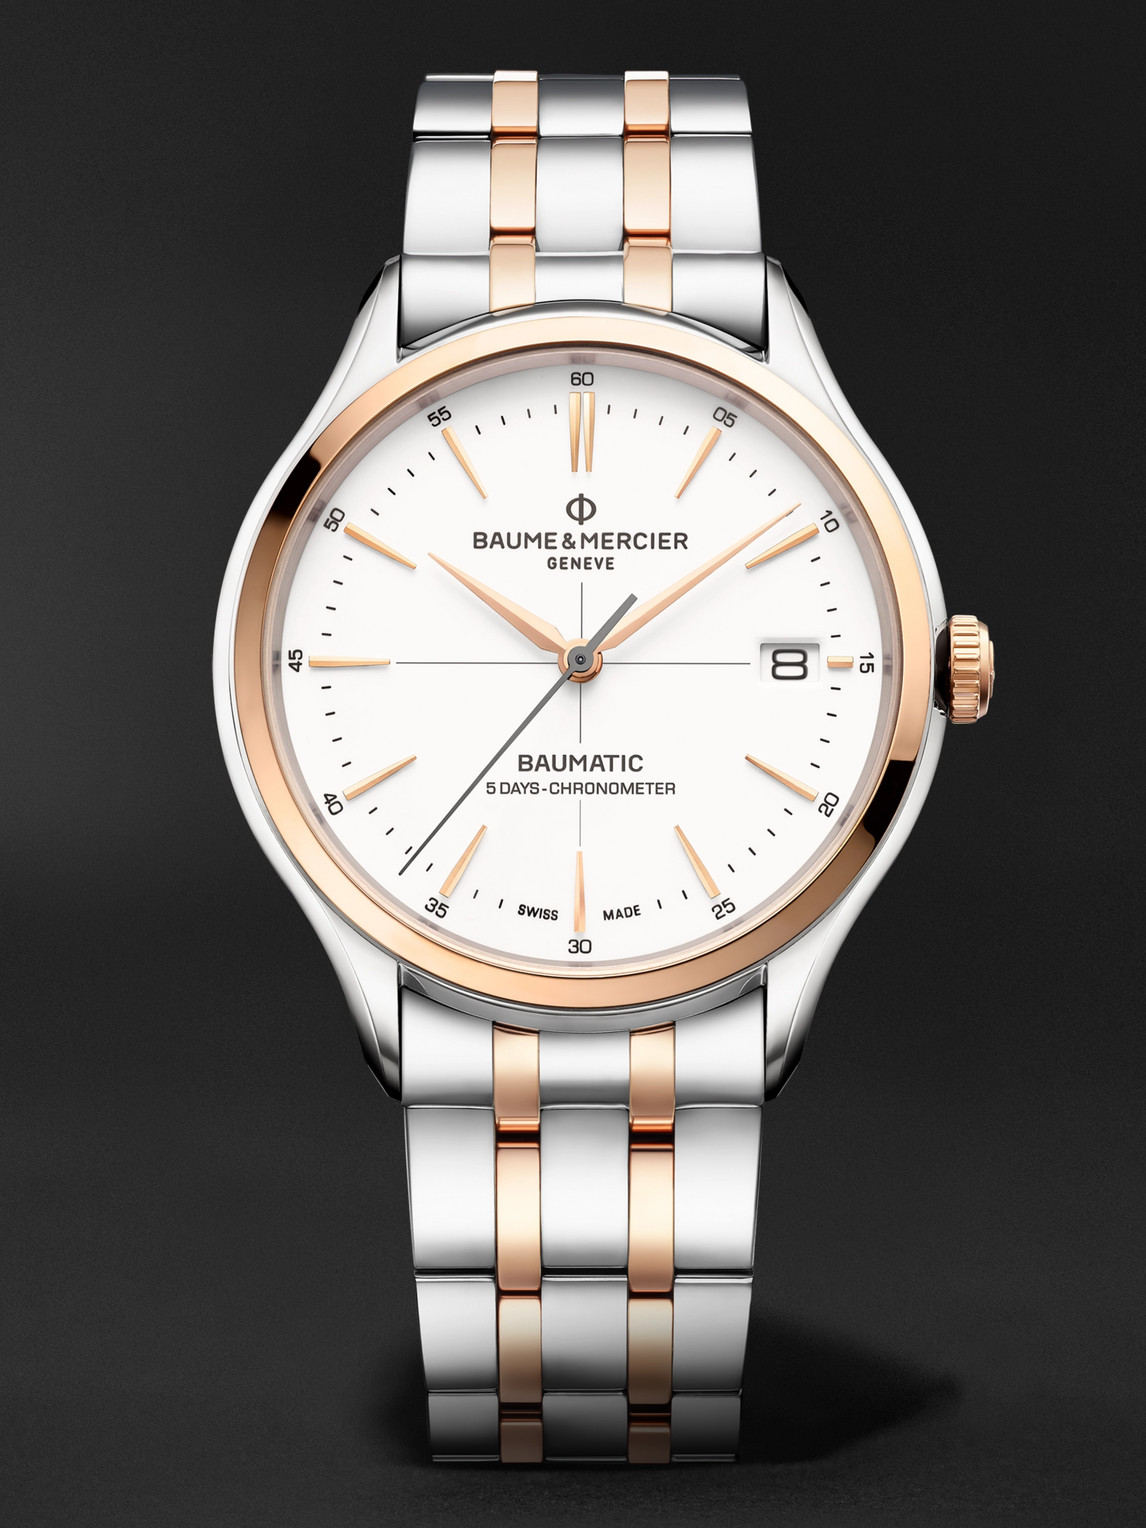 Baume & Mercier Clifton Baumatic Automatic Chronometer 40mm Stainless Steel And 18-karat Rose Gold-capped Watch, Ref In Silver